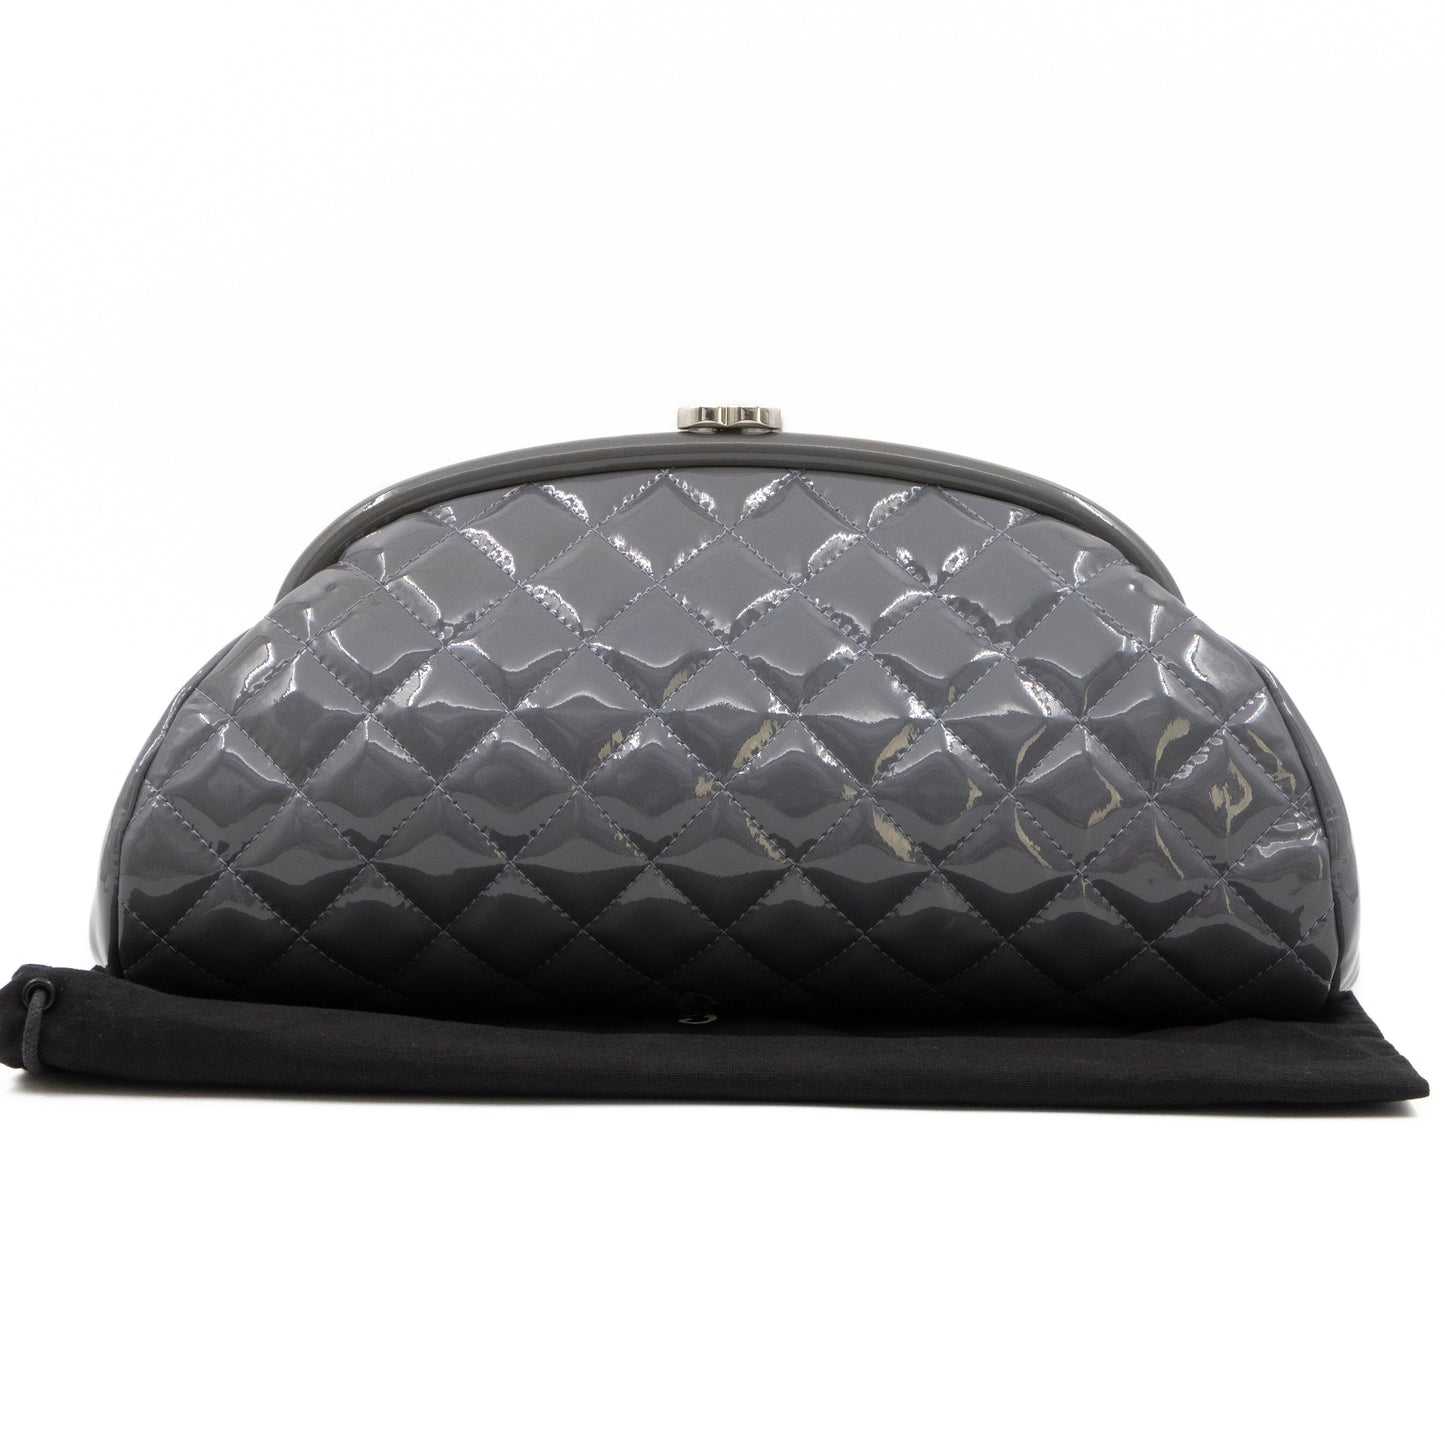 Timeless Clutch Quilted Lavender Blue Patent Leather